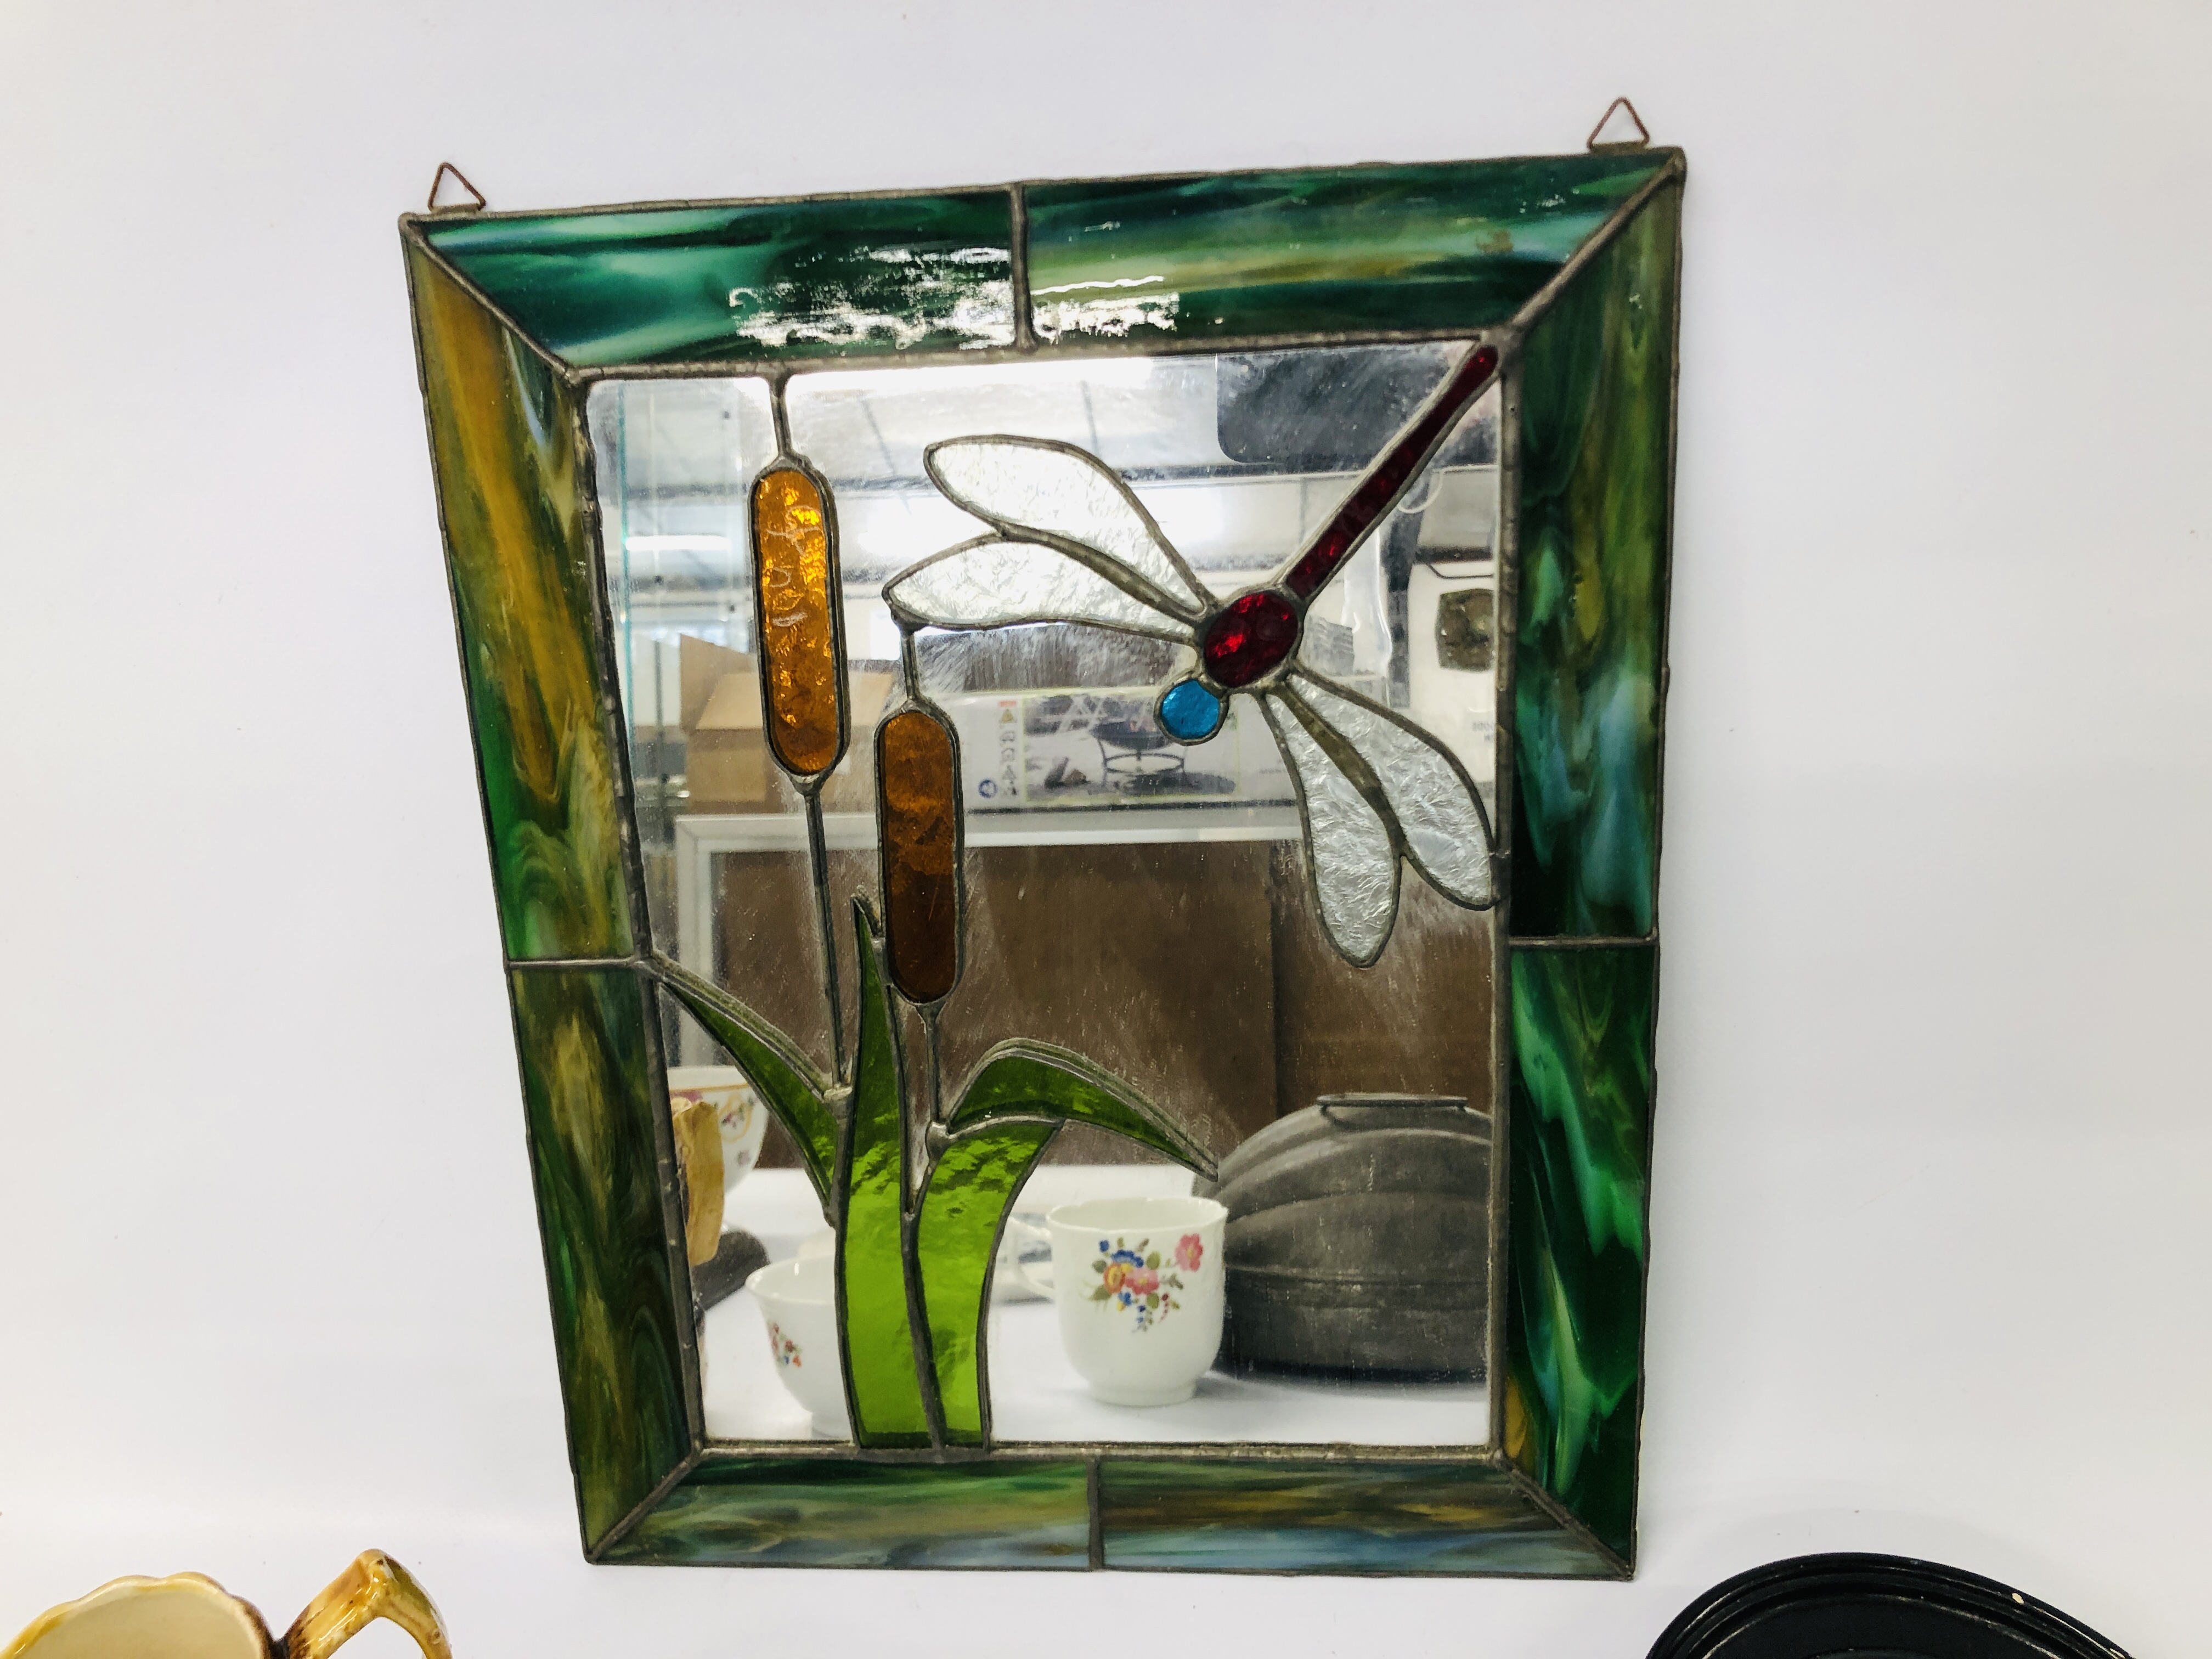 STAINGLASS MIRROR, 2 VINTAGE MOULDS TO INCLUDE ICECREAM AND CANDLE, MAJOLICA STYLE JUG, - Image 9 of 9